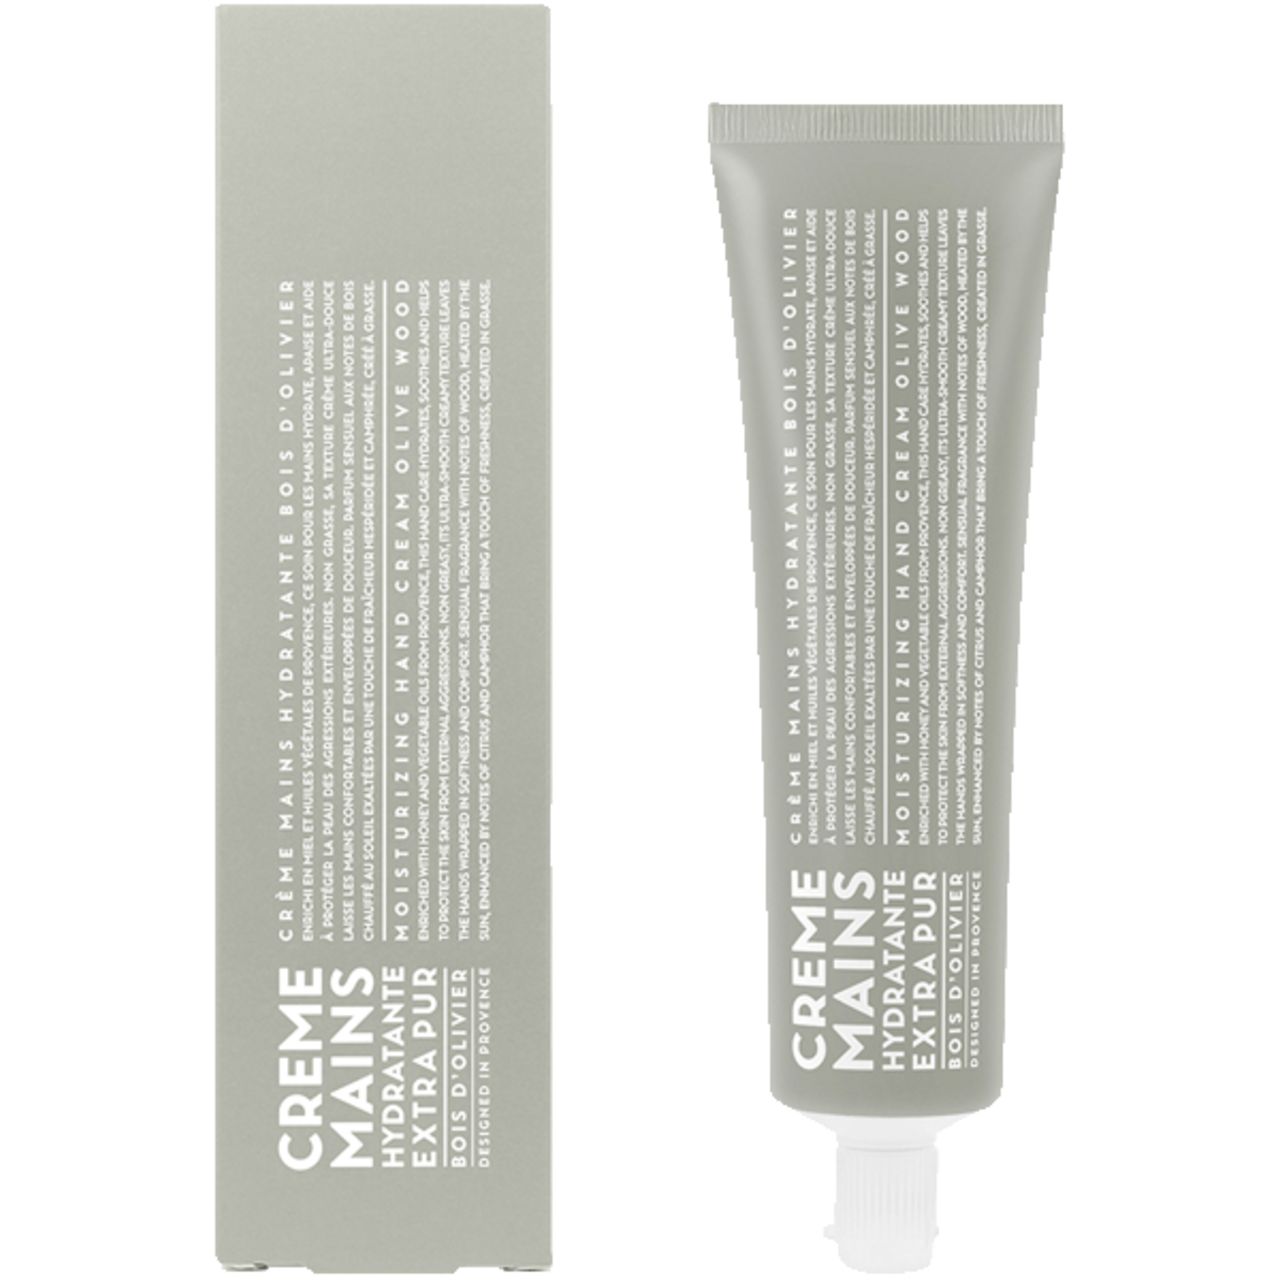 Compagnie de Provence, Extra Pur Hand Cream Olive Wood